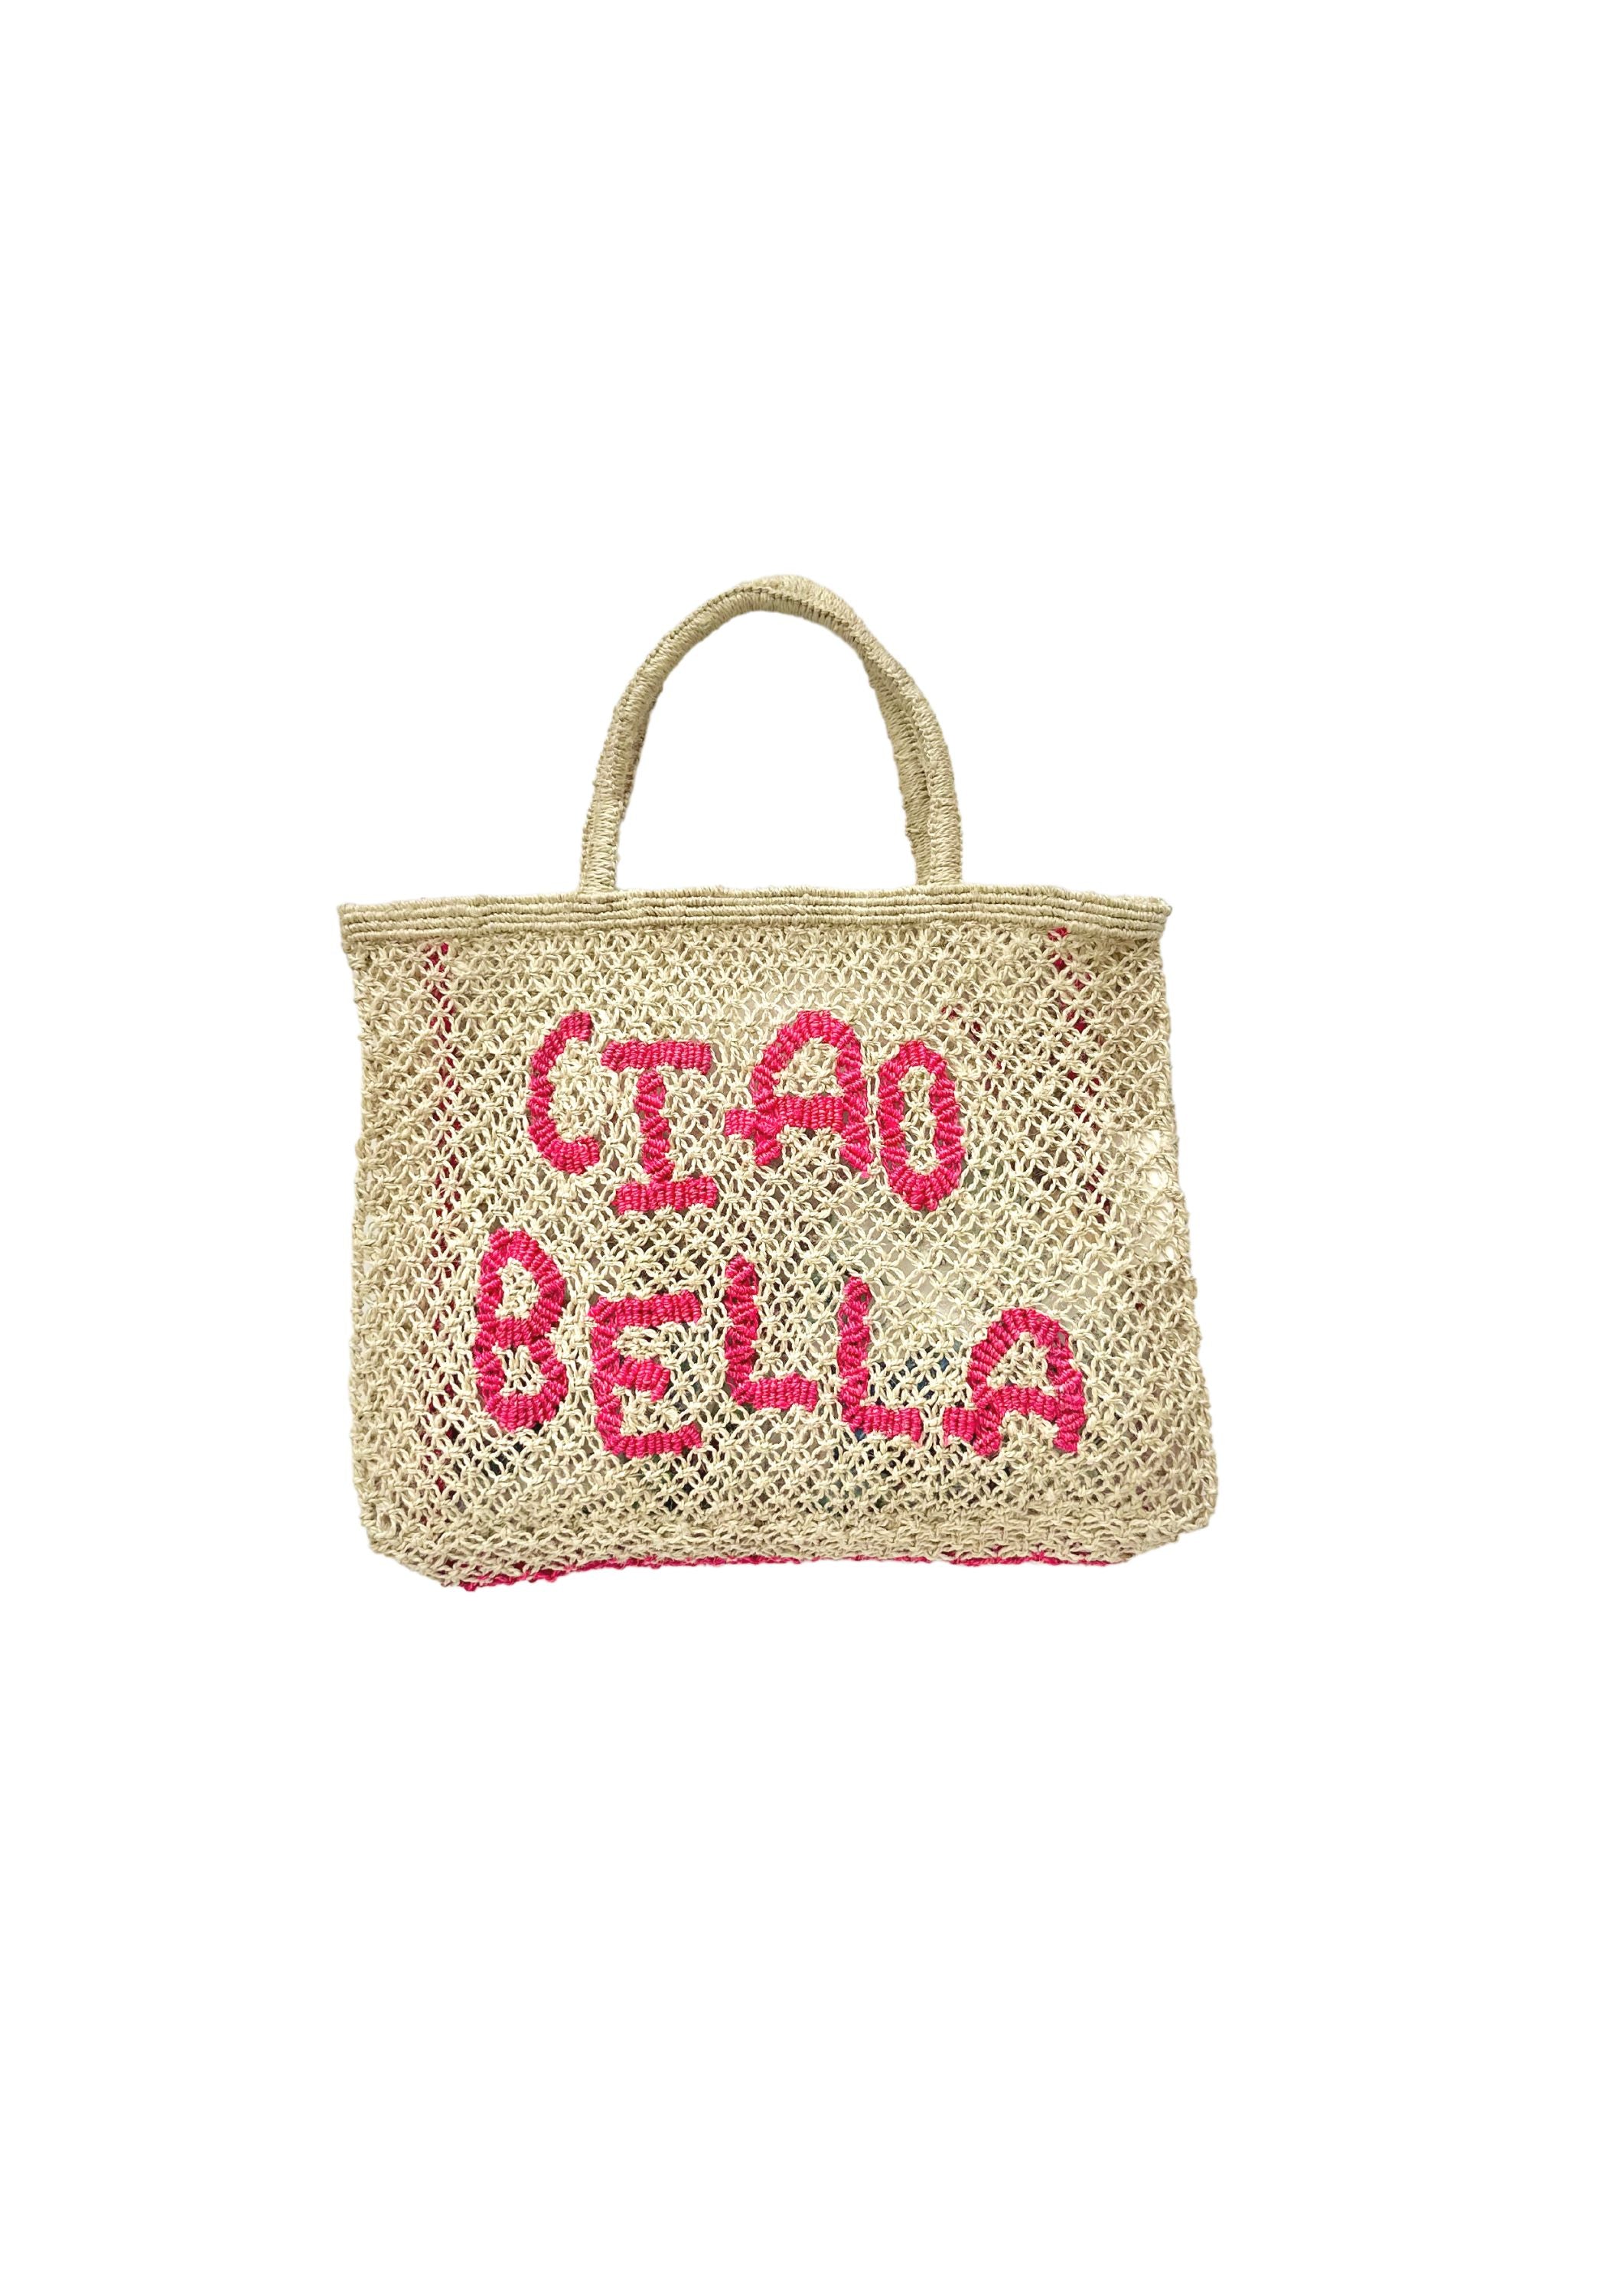 Woven Bag with pink writing saying Ciao Bella on the front